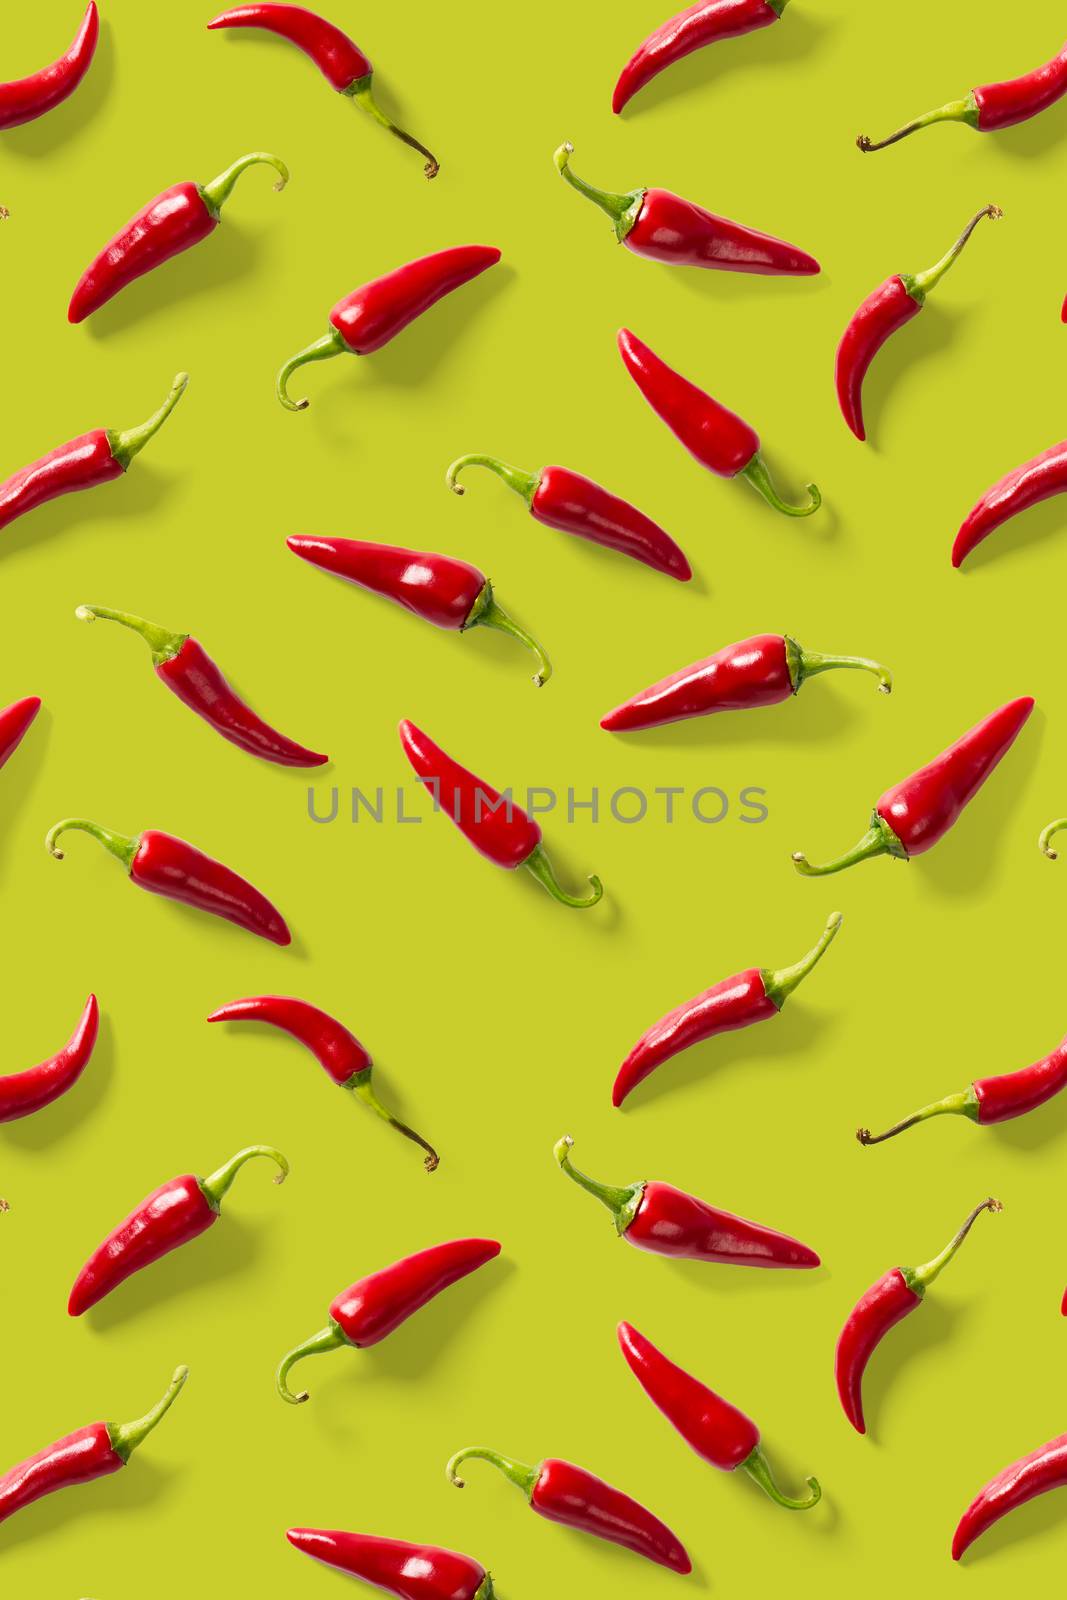 Creative background made of red chili or chilli on green backdrop. Minimal food backgroud. Red hot chilli peppers background, not pattern